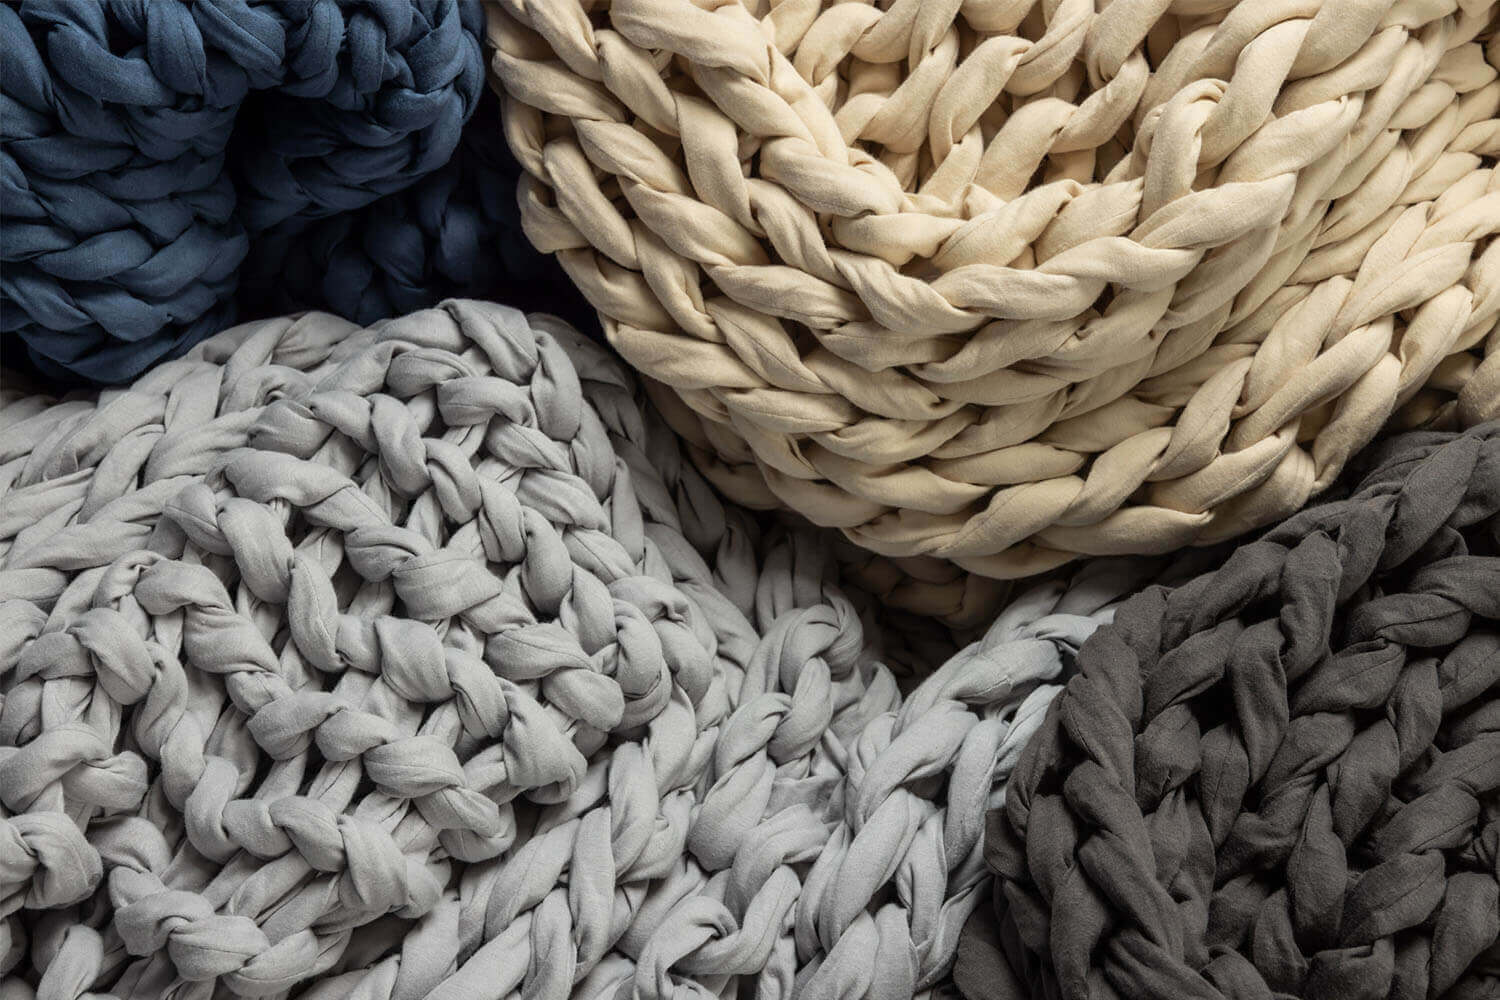 Close up of the four available Douglas Hand Knit Weighted Blanket colours: Dark Grey, Light Grey, Navy, and Cream